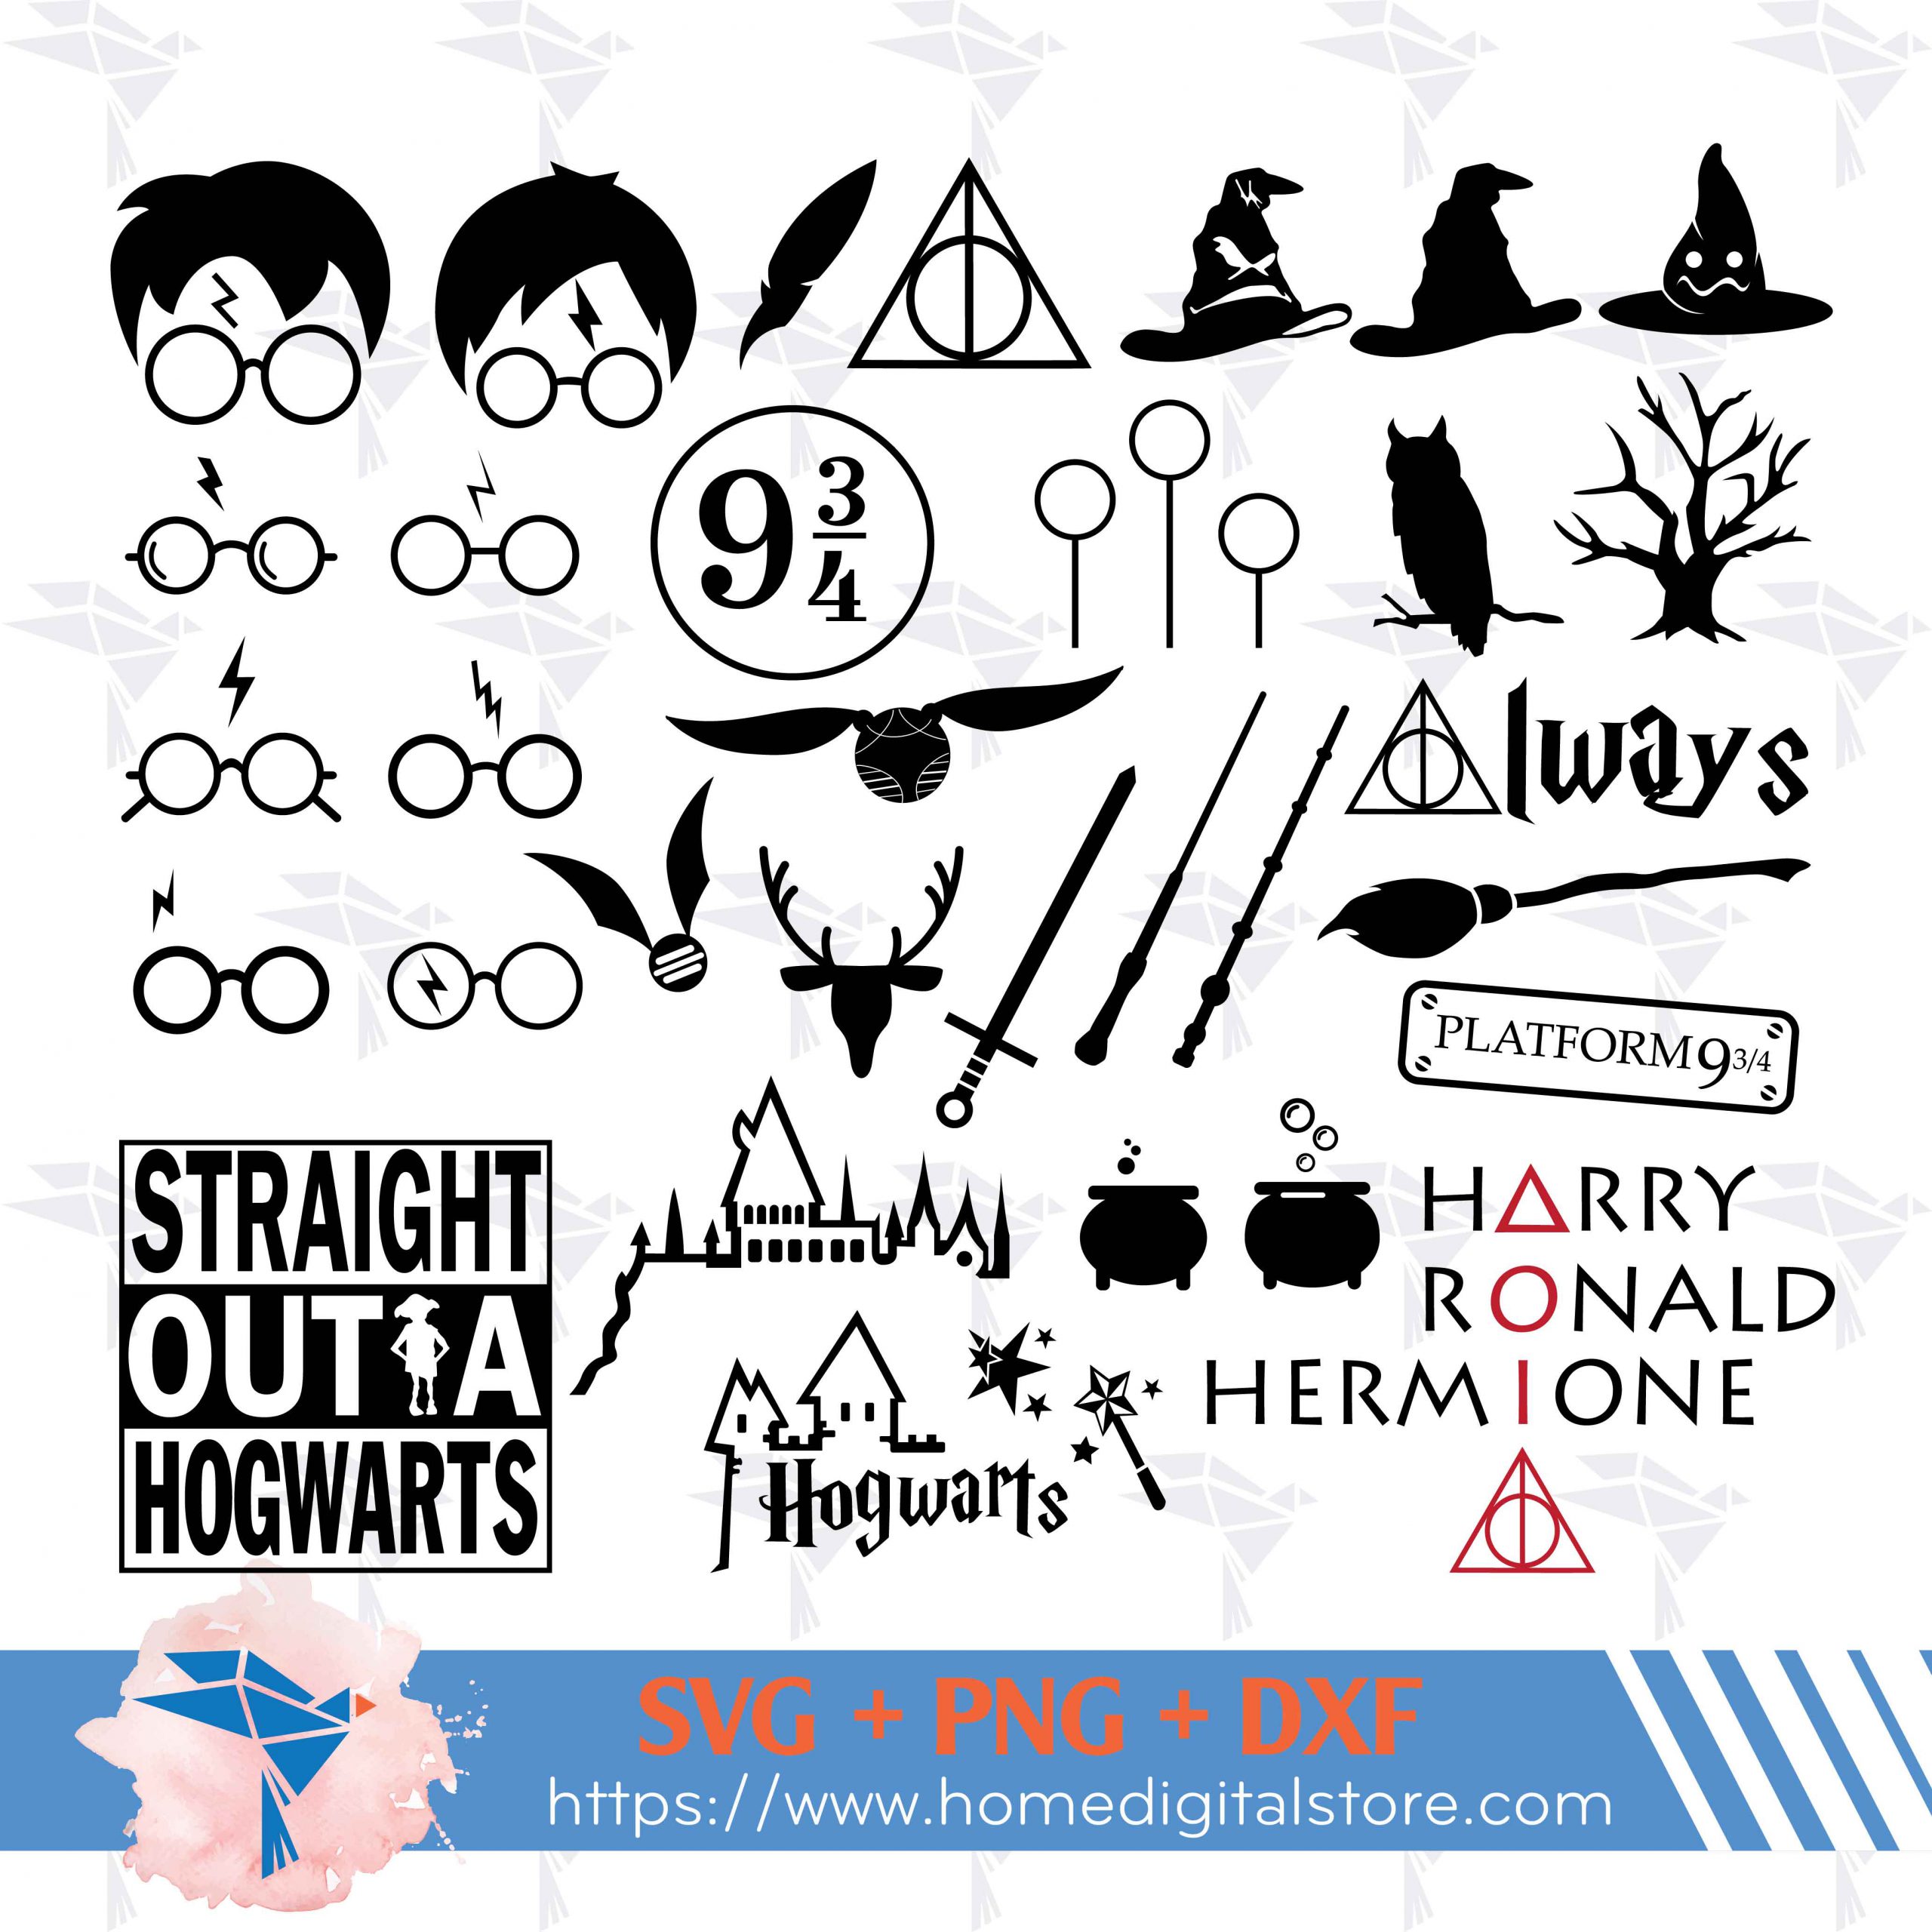 40+ Best Harry Potter SVG Images 2023: Free and Premium